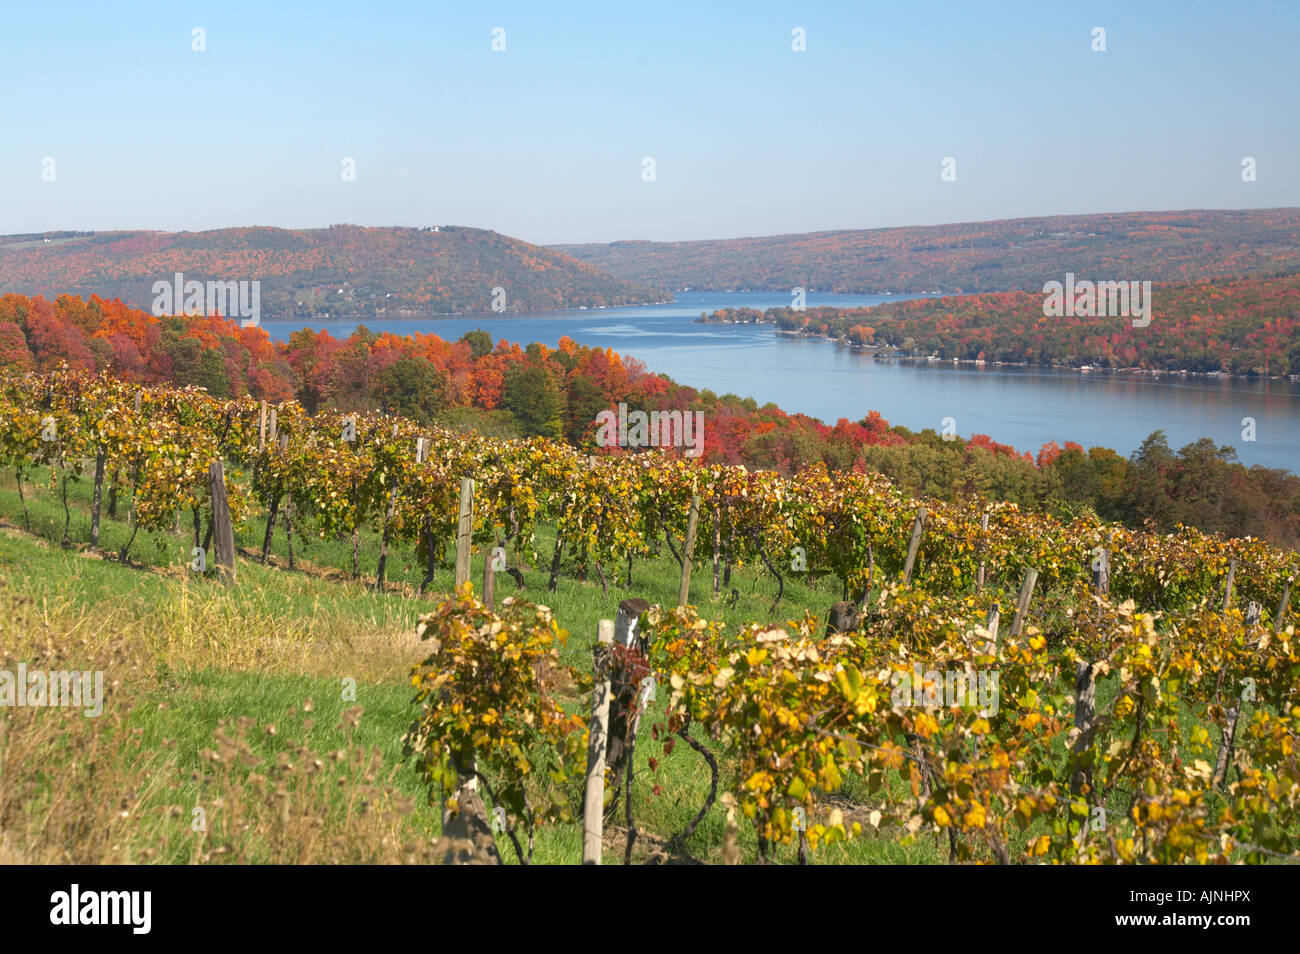 Grape vineyards in fall around Keuka Lake in the Finger Lakes Region of New York United States Stock Photo